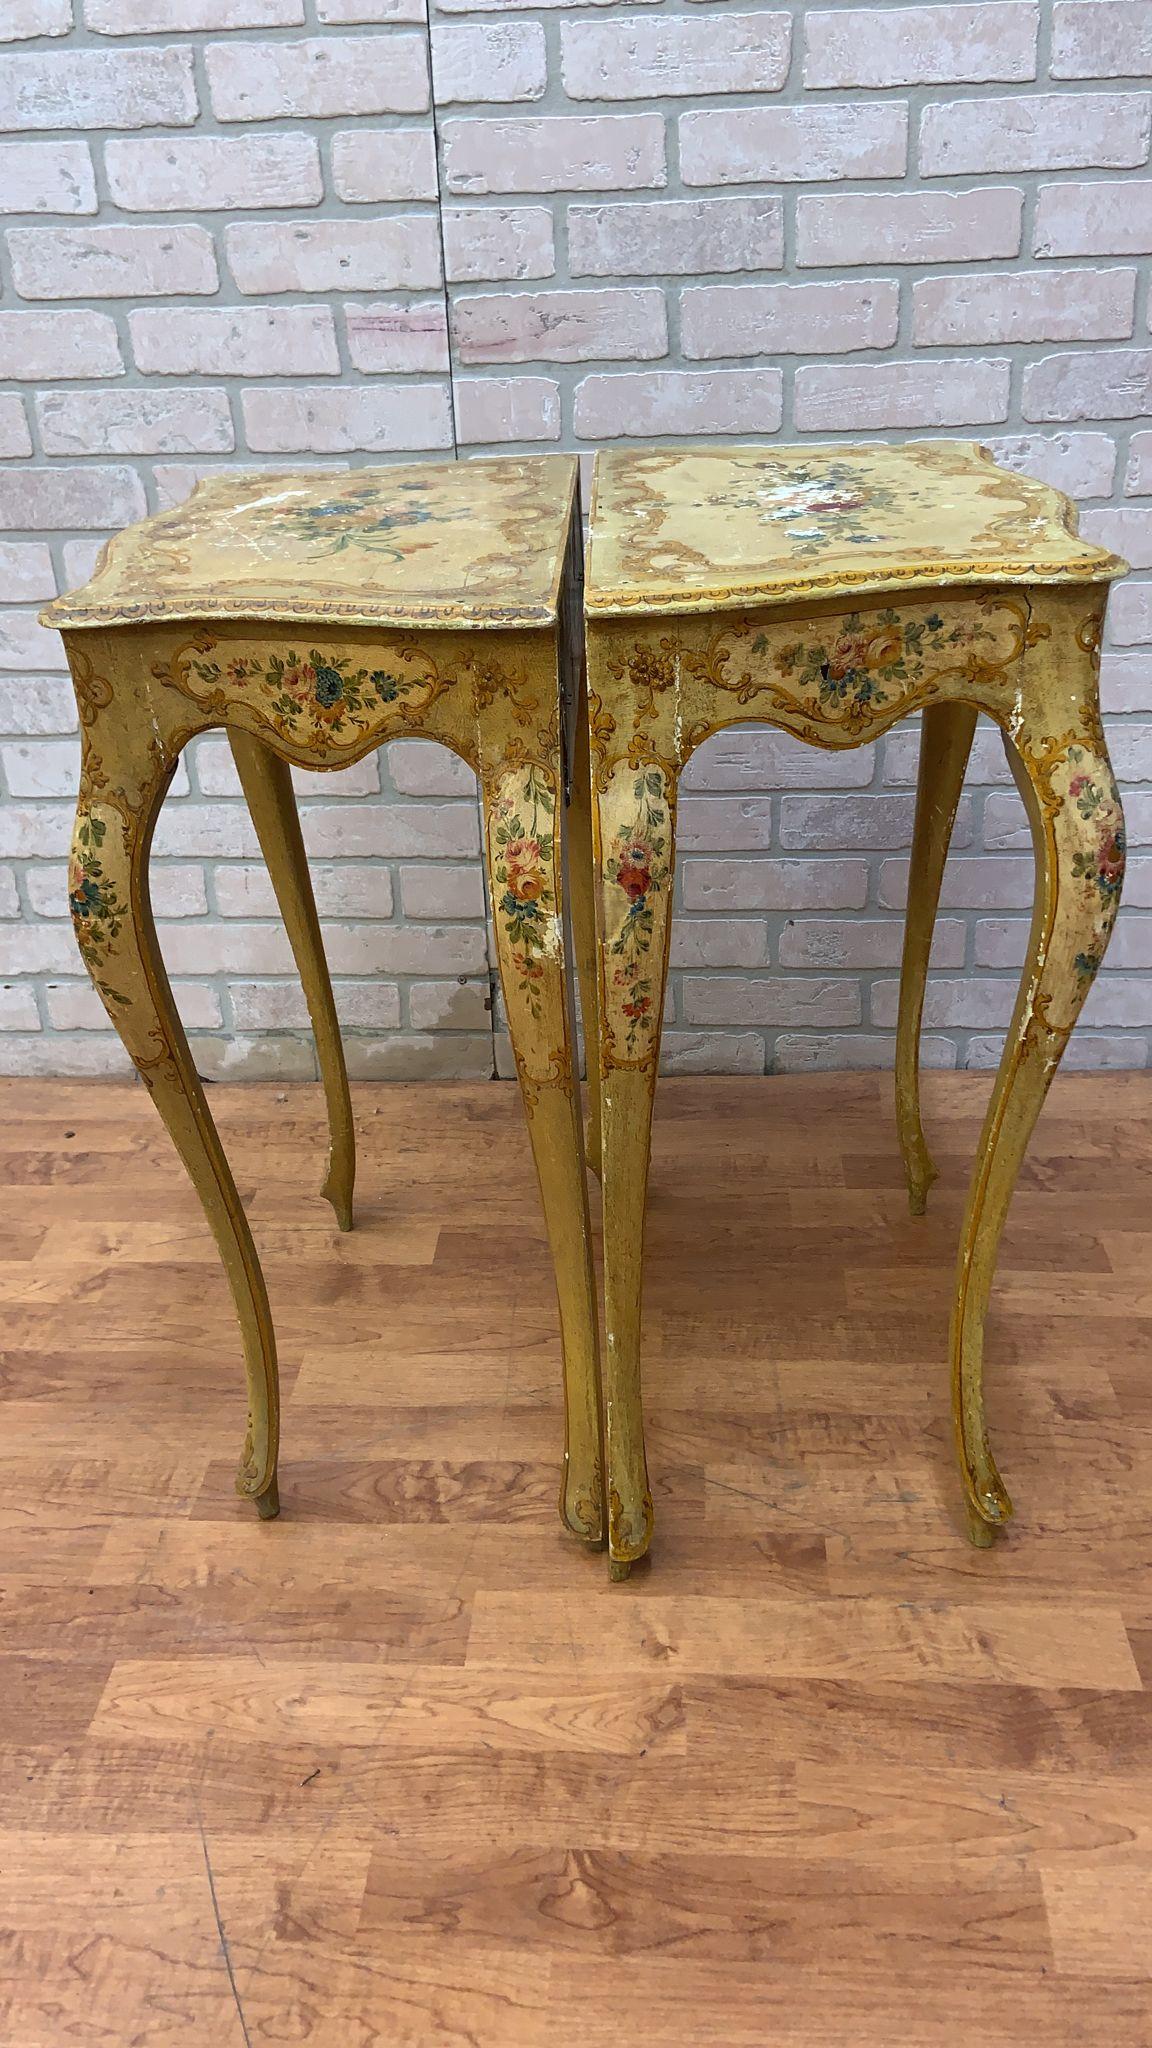 Antique Rococo Style Venetian Hand Painted Vanity Desk & Side Tables, Set of 3 For Sale 8